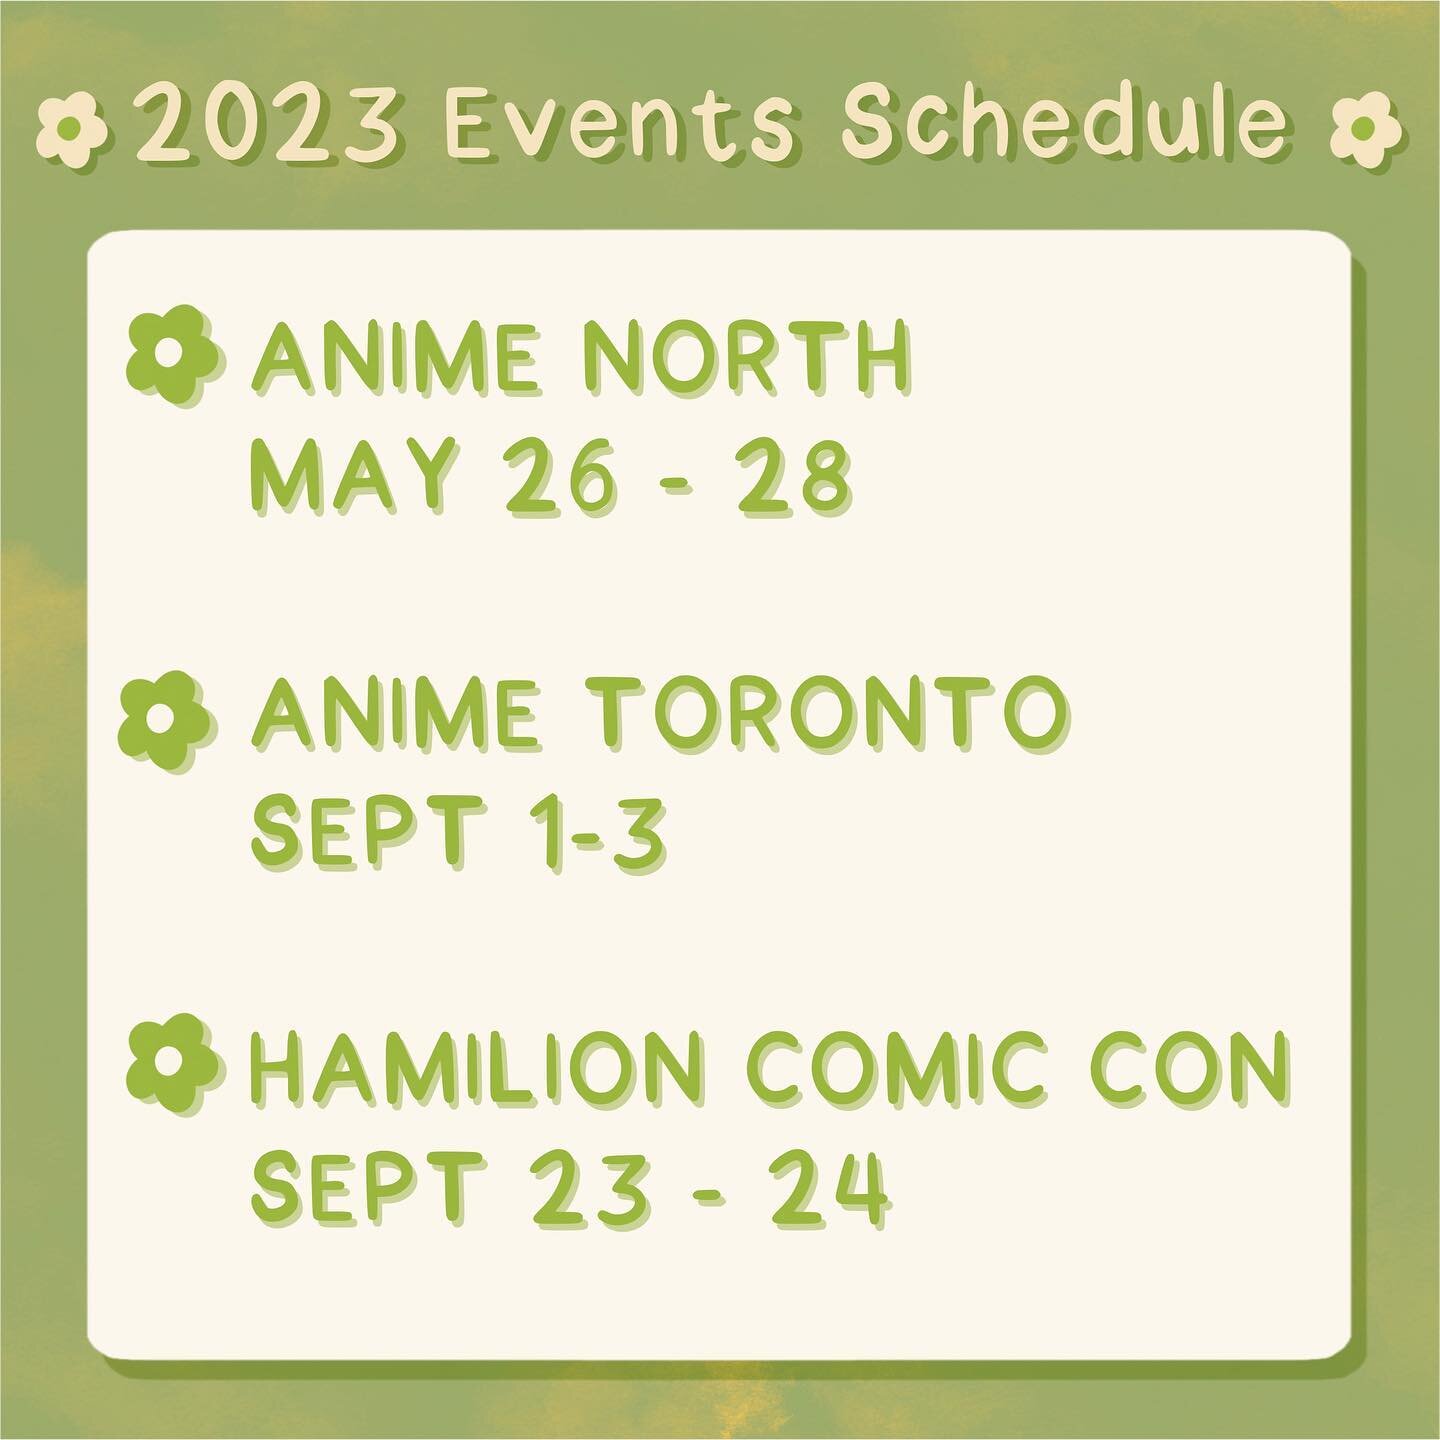 ✨This is a reminder that Anime North is one week away. Here is my event schedule, my friends and I will be attending. I also only sell my anime prints at conventions, so if you are interested, come and swing by my booth. ✍🏼There will be further upda